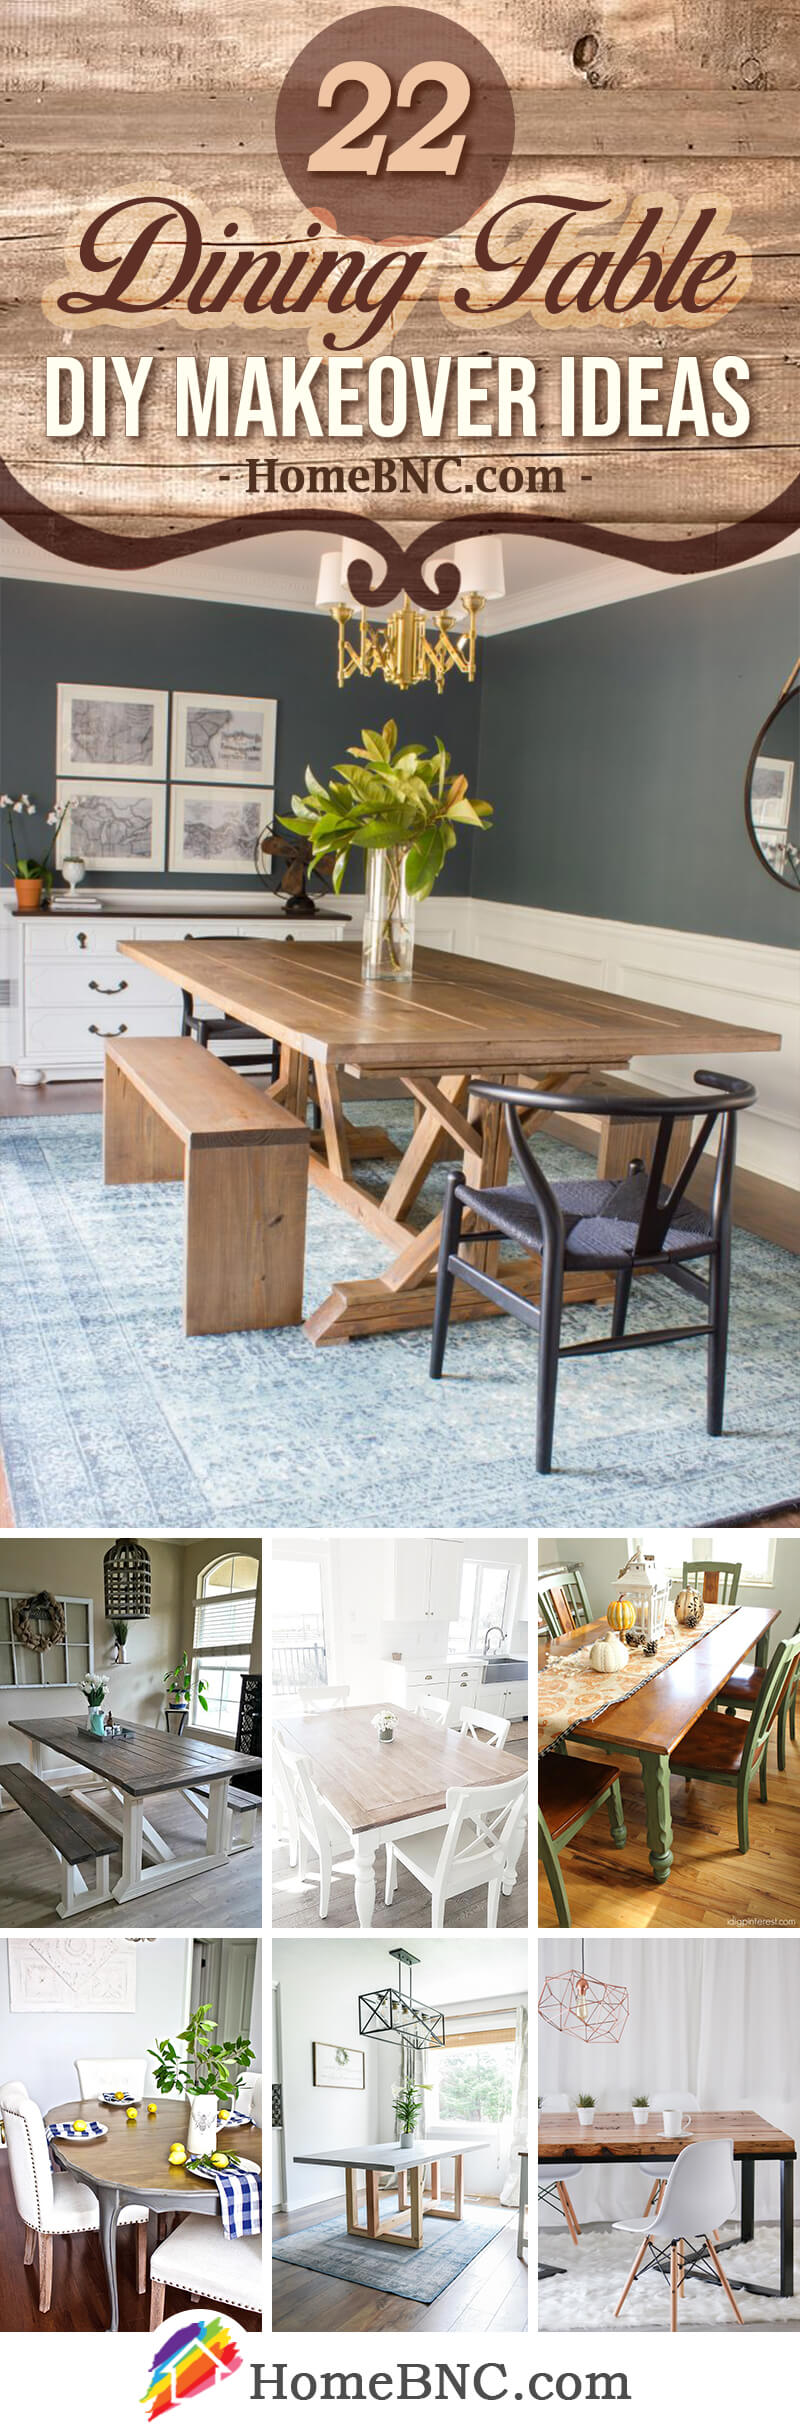 18 DIY Dining Table Makeover Ideas for 2018